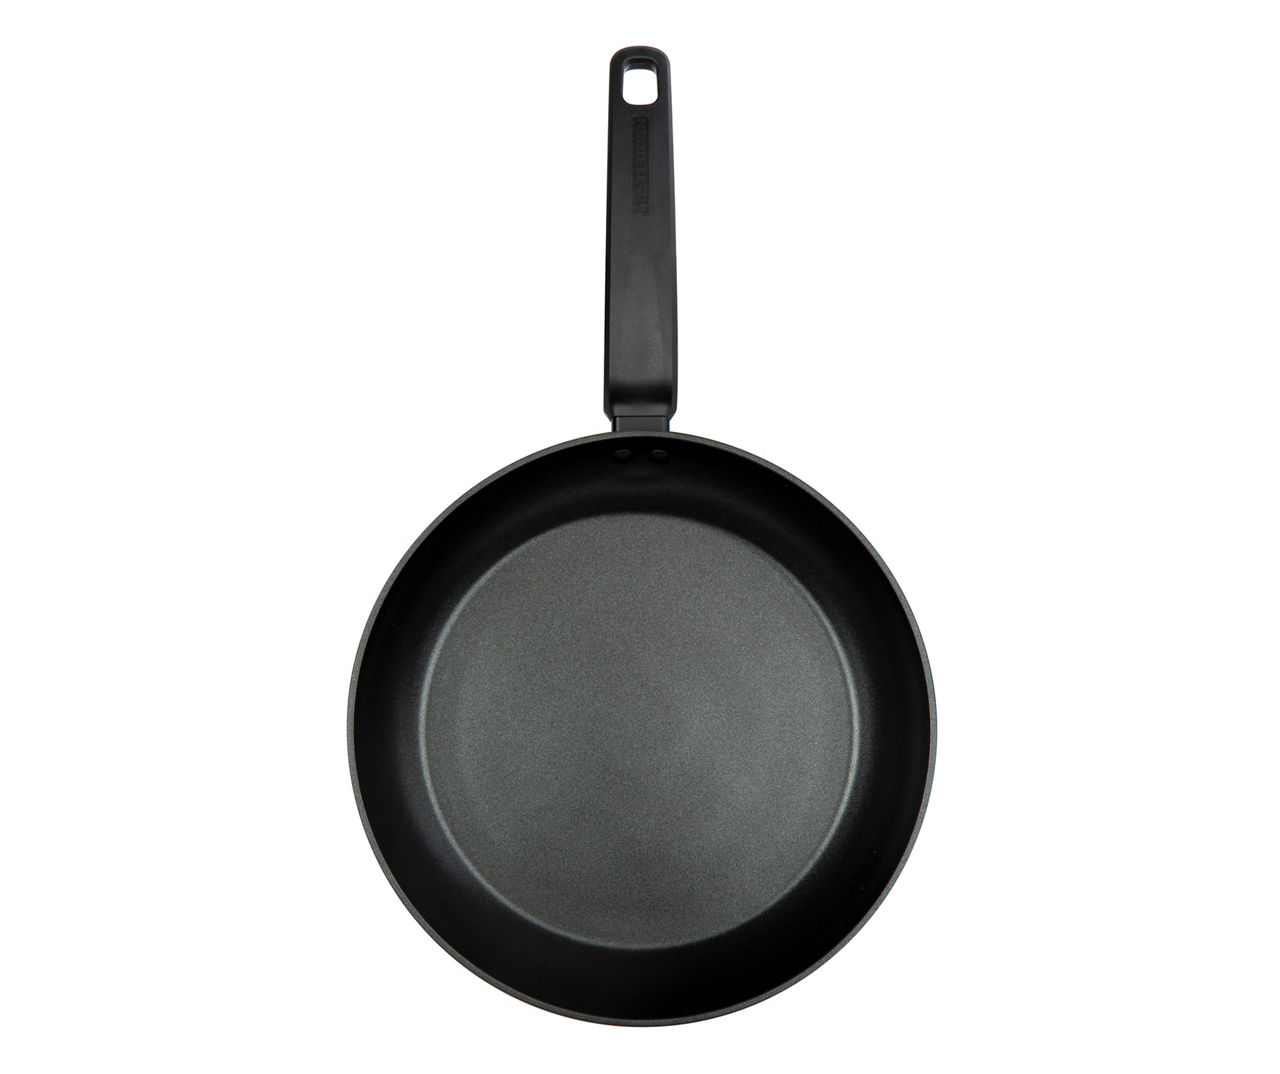 Mason Craft and More 11 Mcm Open Square with Assist Handle Cast Iron Frying Pan | Black | One Size | Cookware Frying Pans